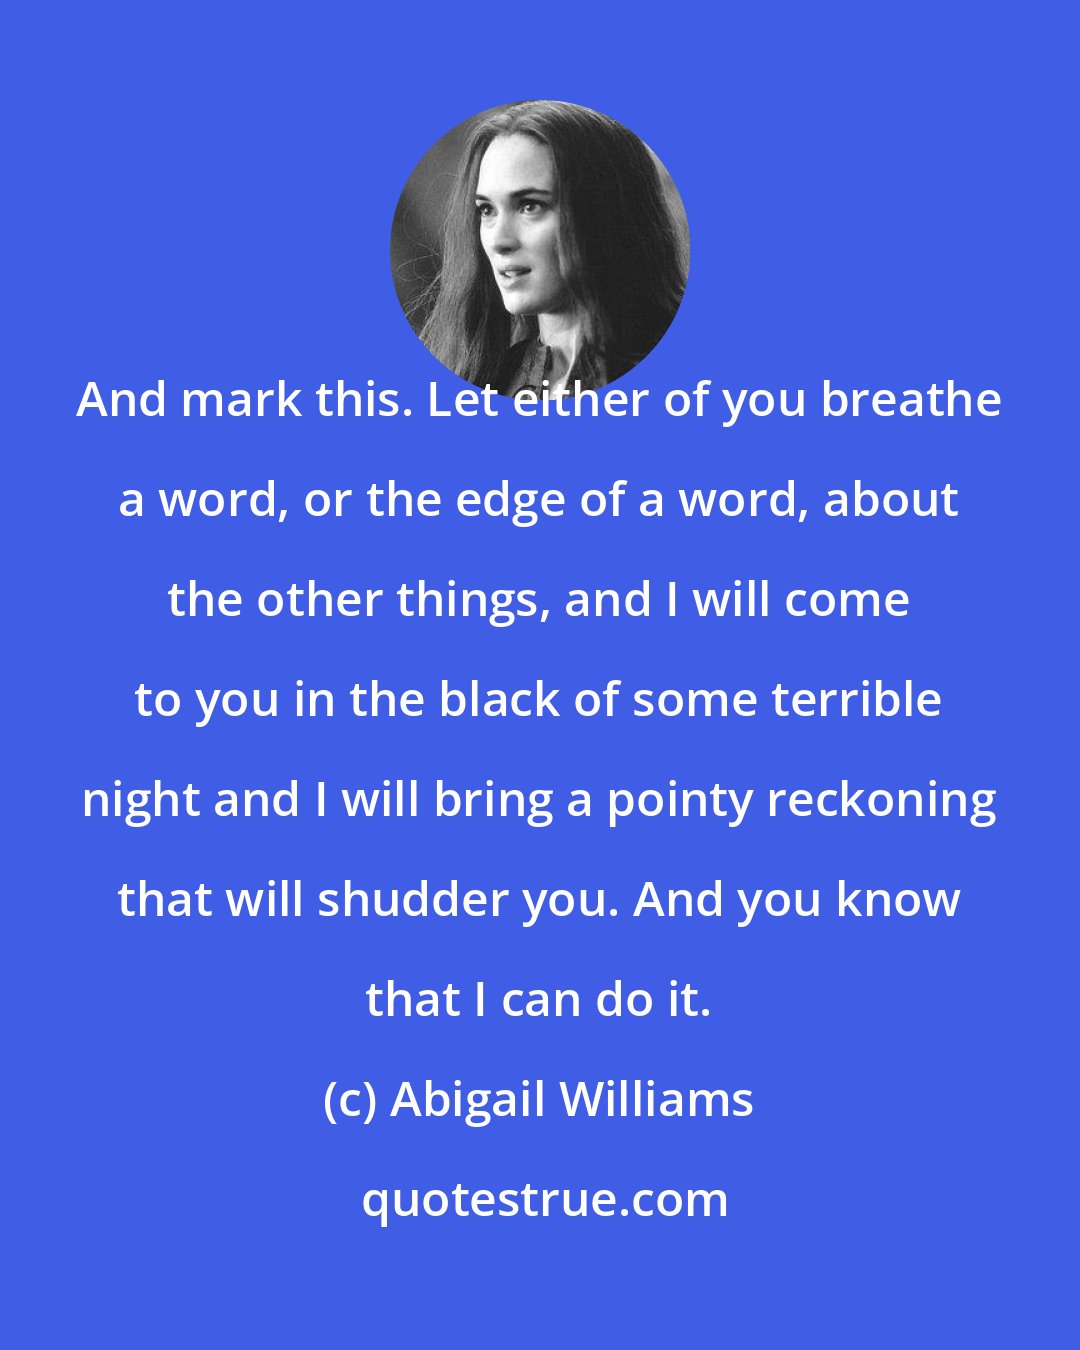 Abigail Williams: And mark this. Let either of you breathe a word, or the edge of a word, about the other things, and I will come to you in the black of some terrible night and I will bring a pointy reckoning that will shudder you. And you know that I can do it.